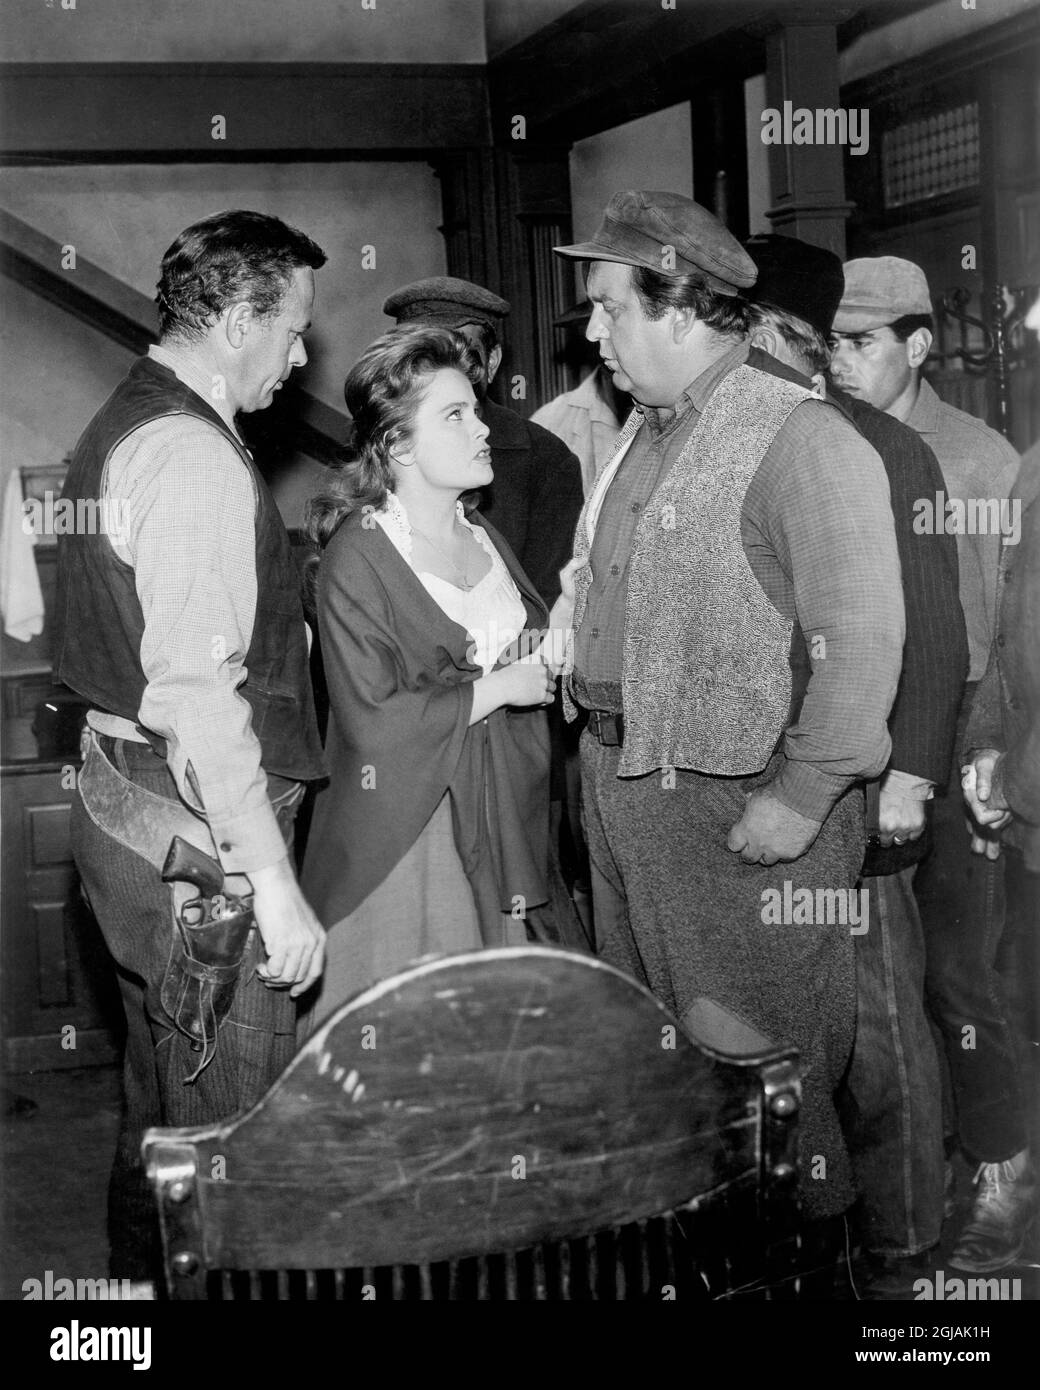 Ulla Jacobsson (center), Jacques Aubuchon (right), on-set of the TV Series 'The Virginian', Episode: 'The Final Hour', Revue Studios, 1963 Stock Photo